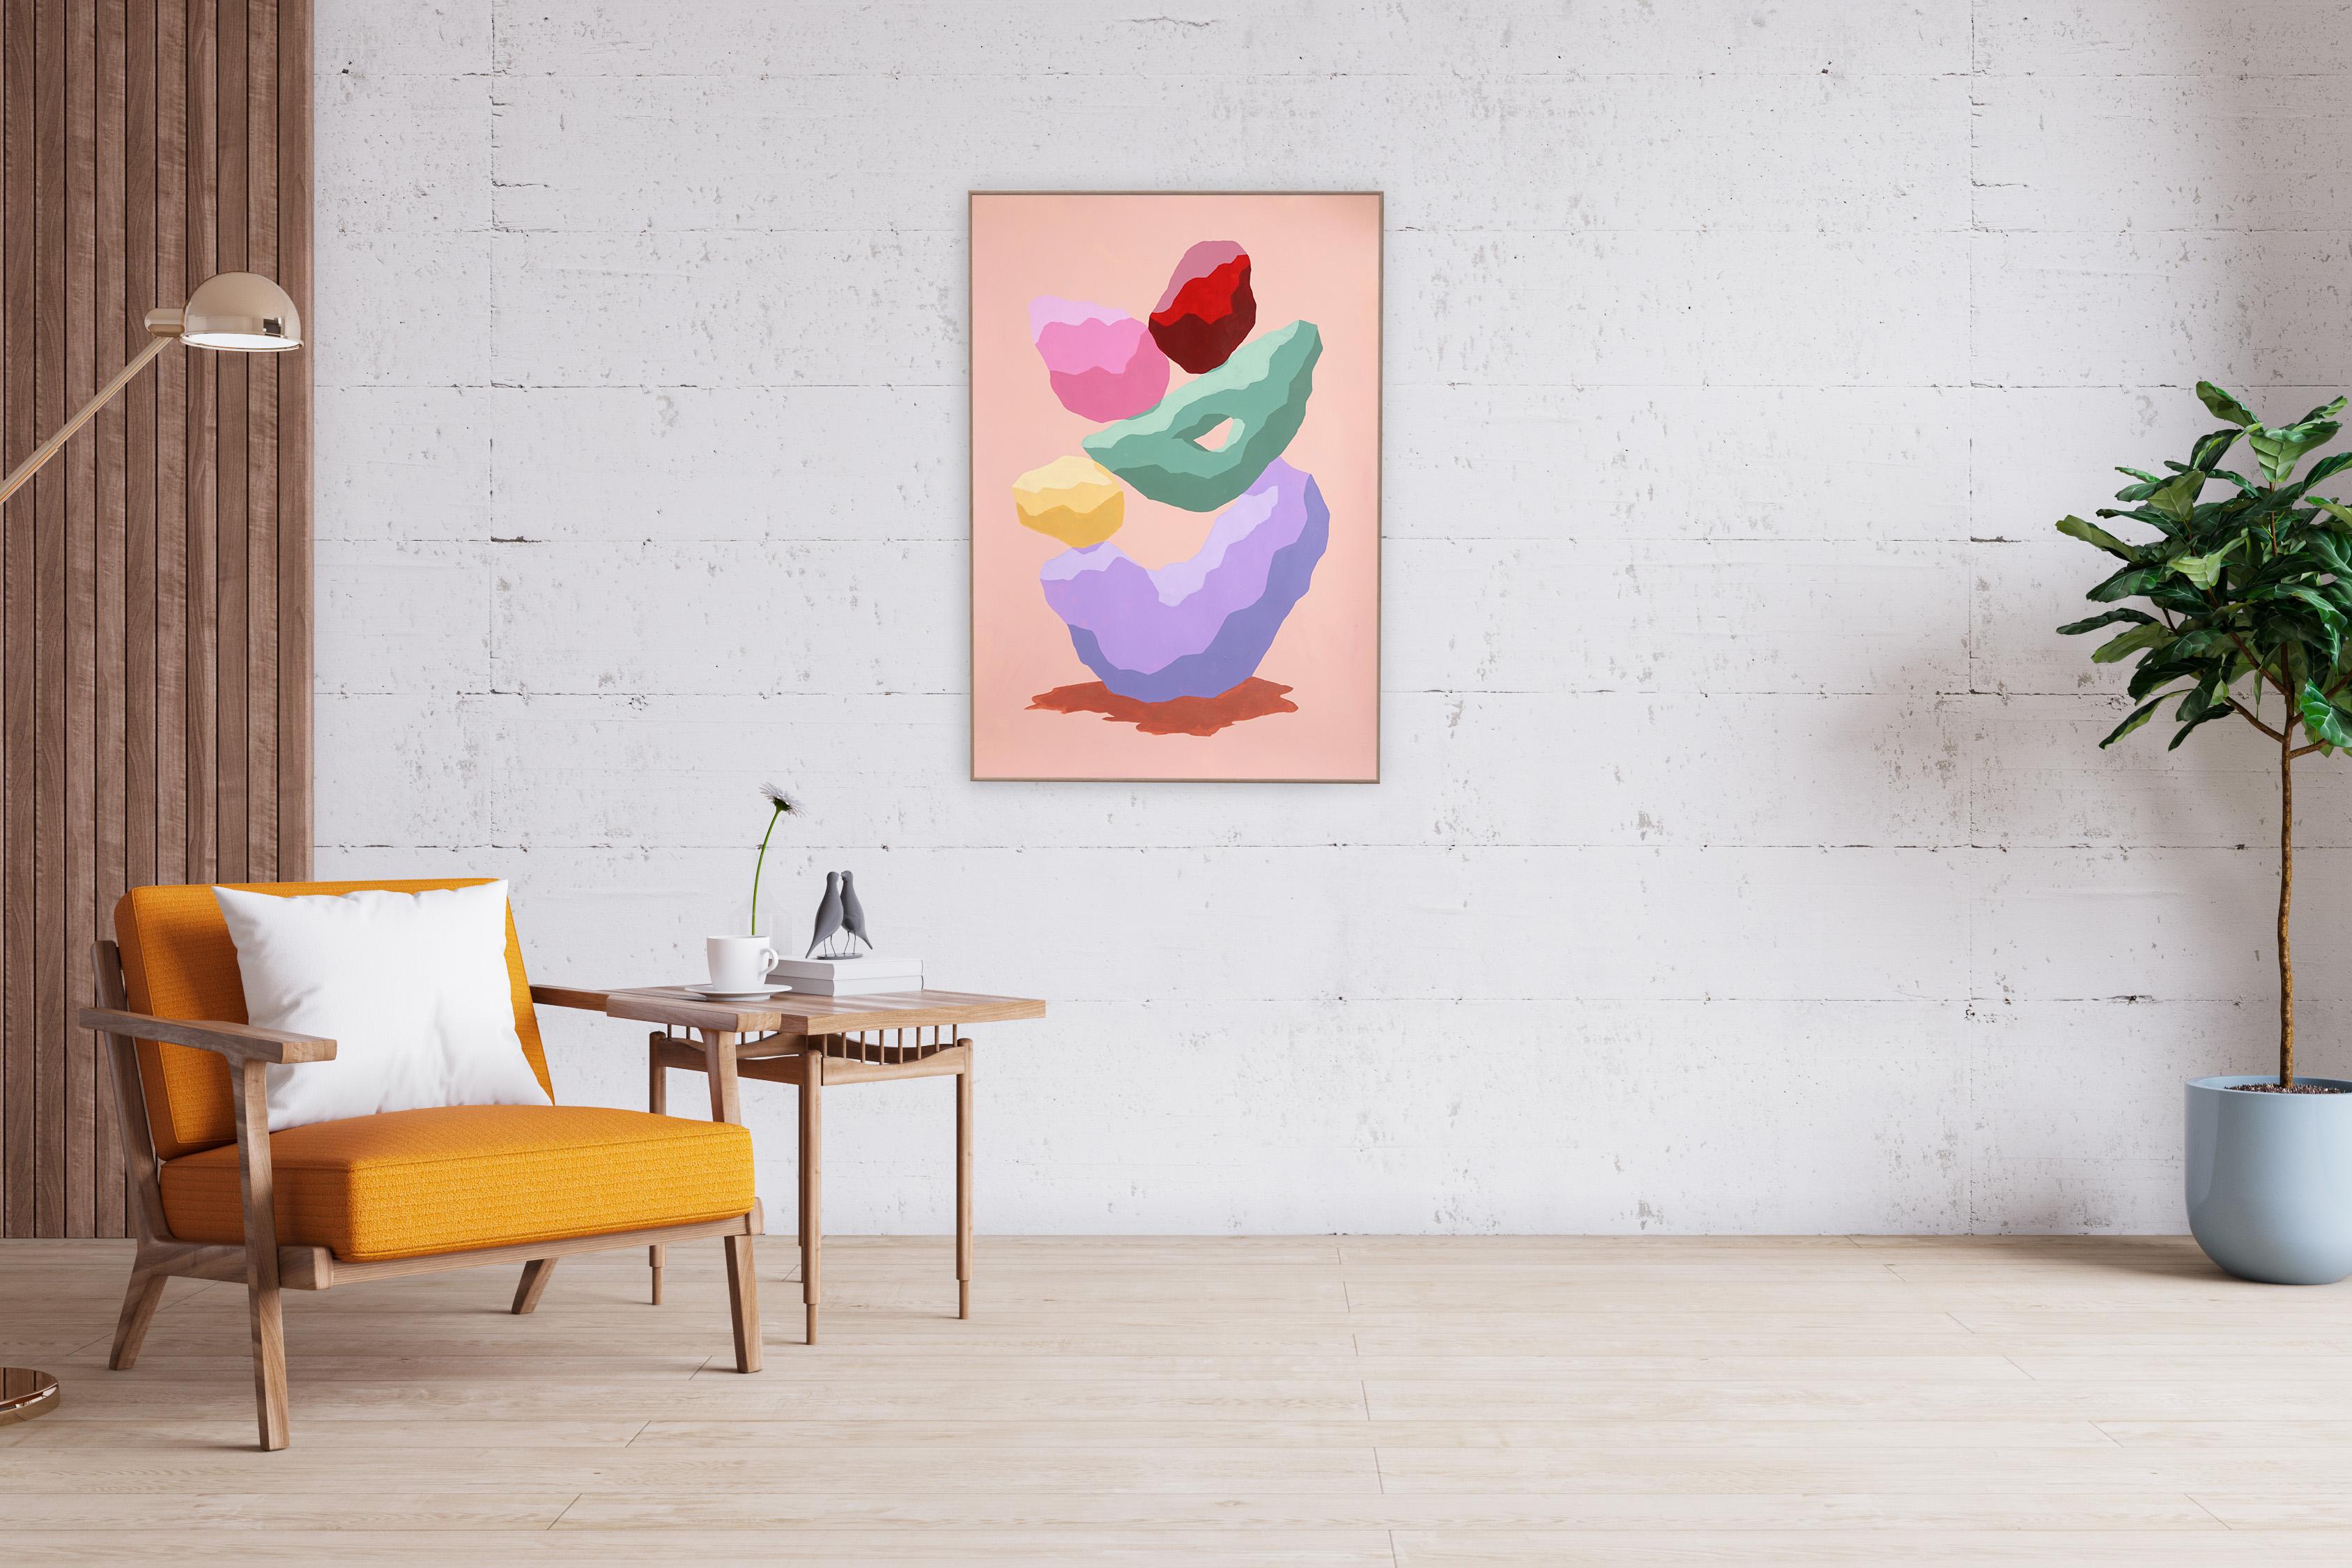 Pile de bonbons, Vivid Colors, Abstract Render Totem Painting, Urban Gems, Red Green 3